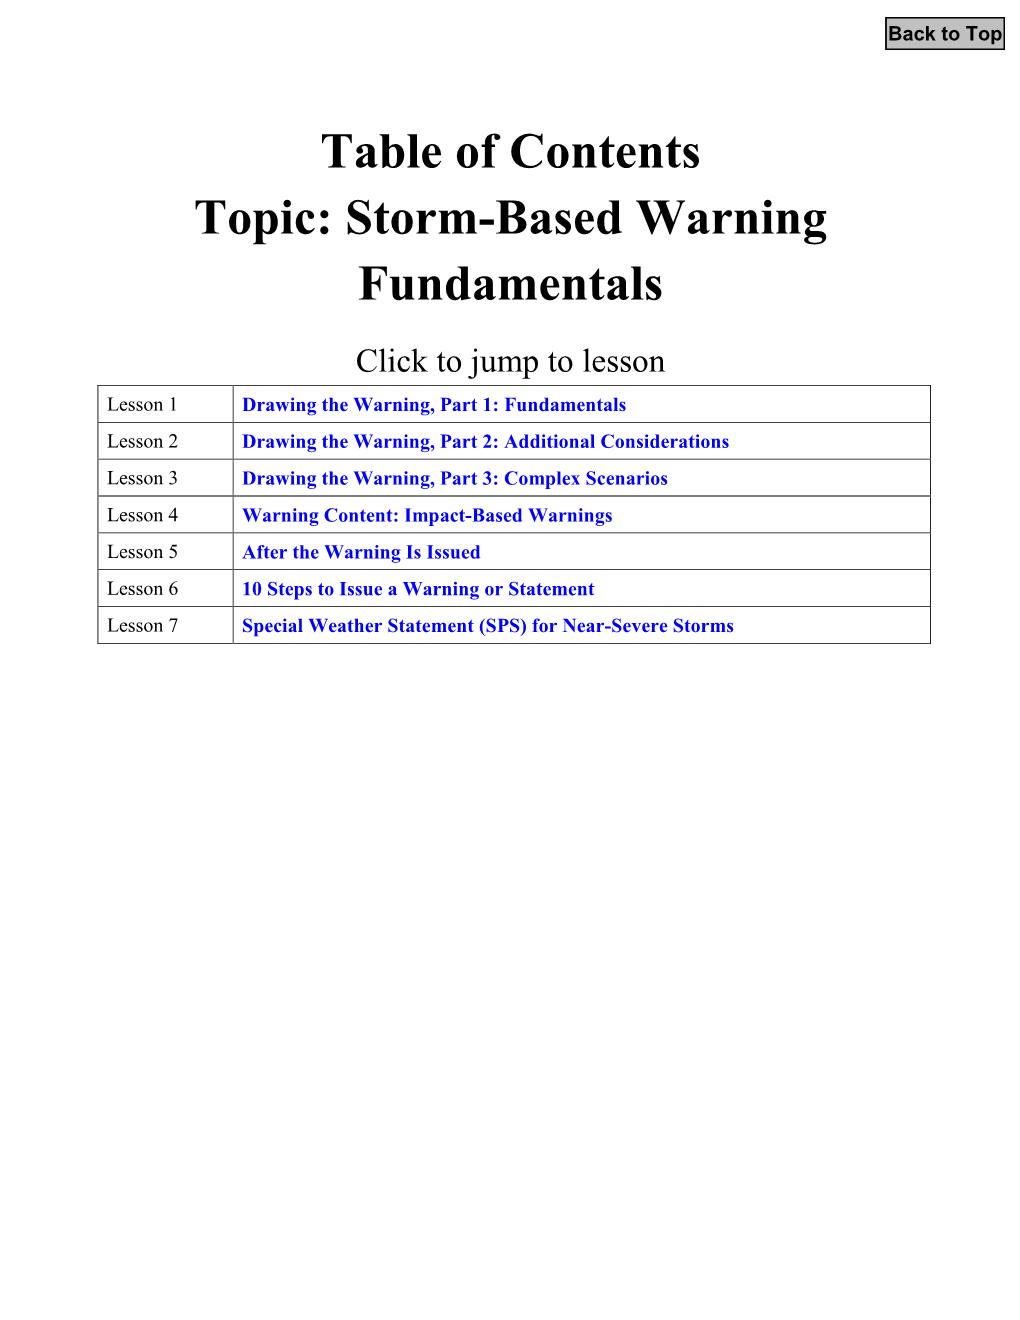 Table of Contents Topic: Storm-Based Warning Fundamentals